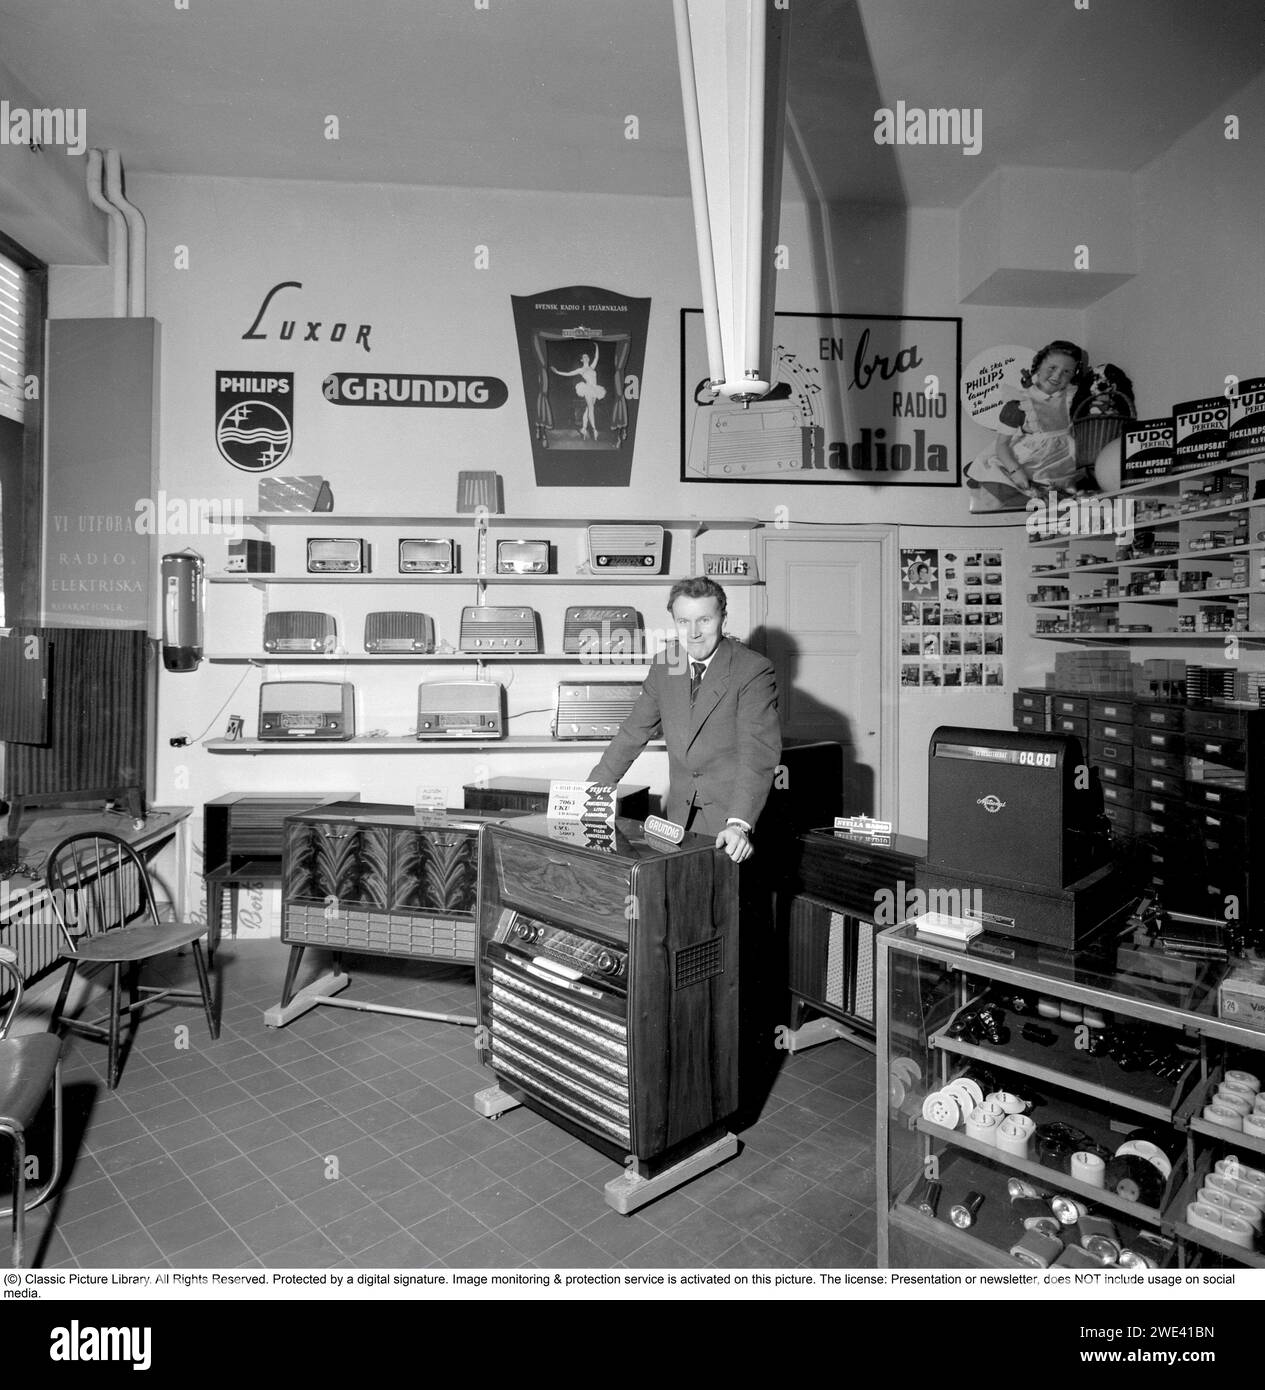 In the 1950s. Interior of a radio and tv store 1956. A salesman is seen at a Grundig radio gramophone Model 7063. On the shelfes are smaller transistor radios and advertisments for brands like Philips, Luxor and Radiola.   Conard ref 3210 Stock Photo